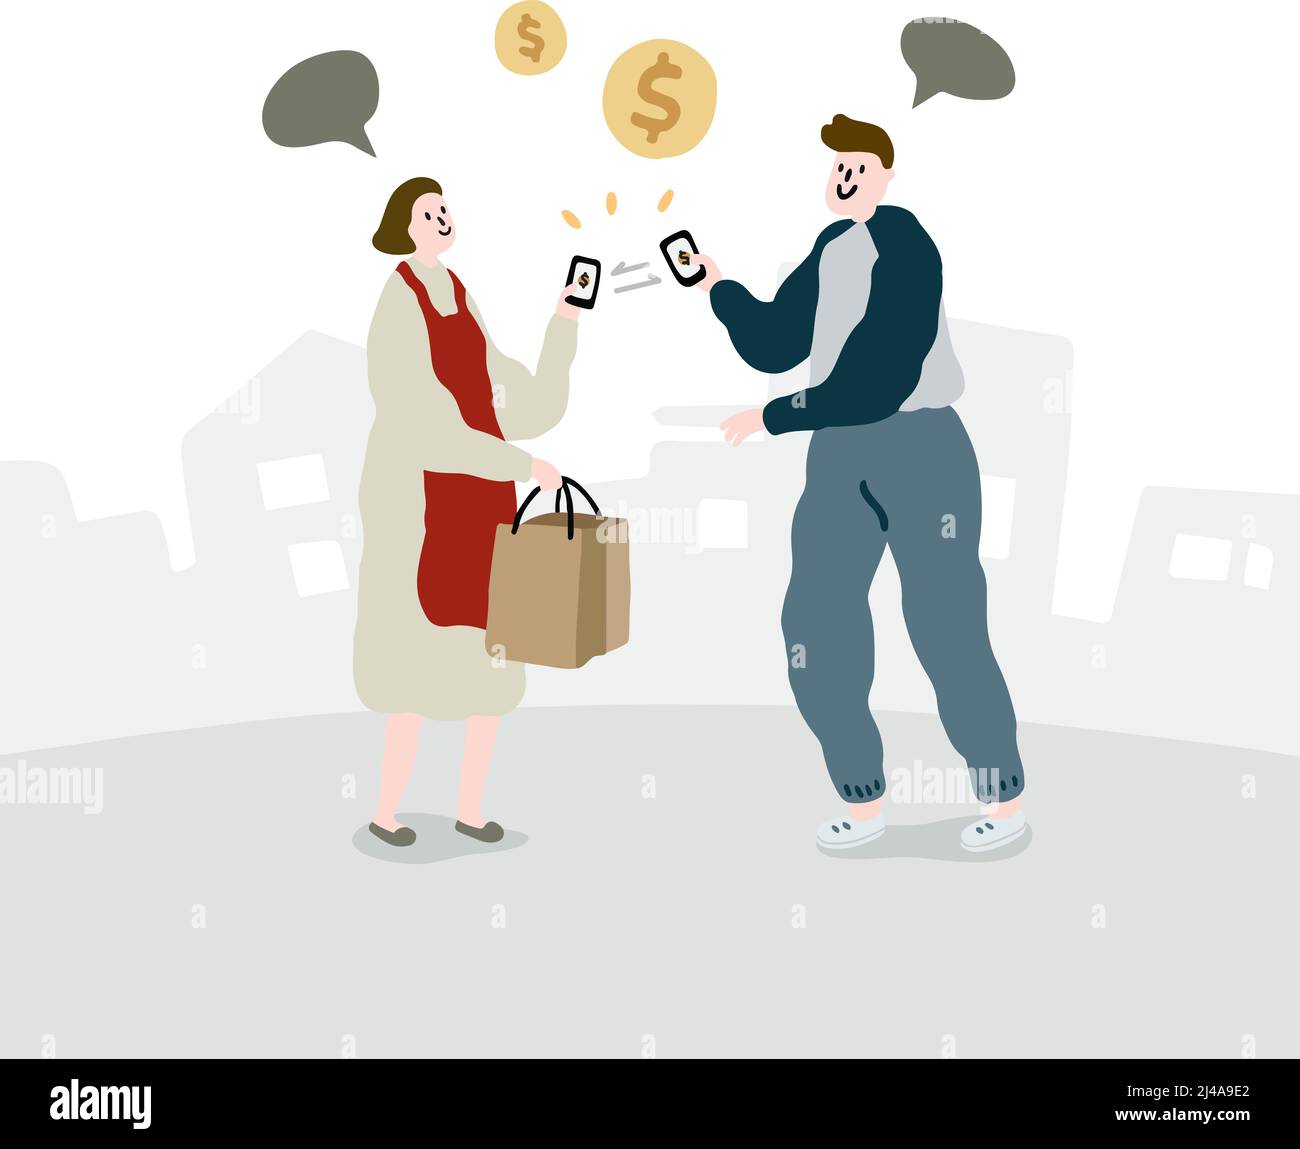 Hand drawn vector illustration of people using digital wallets for shopping. Mobile electronic money transfers. Stock Vector